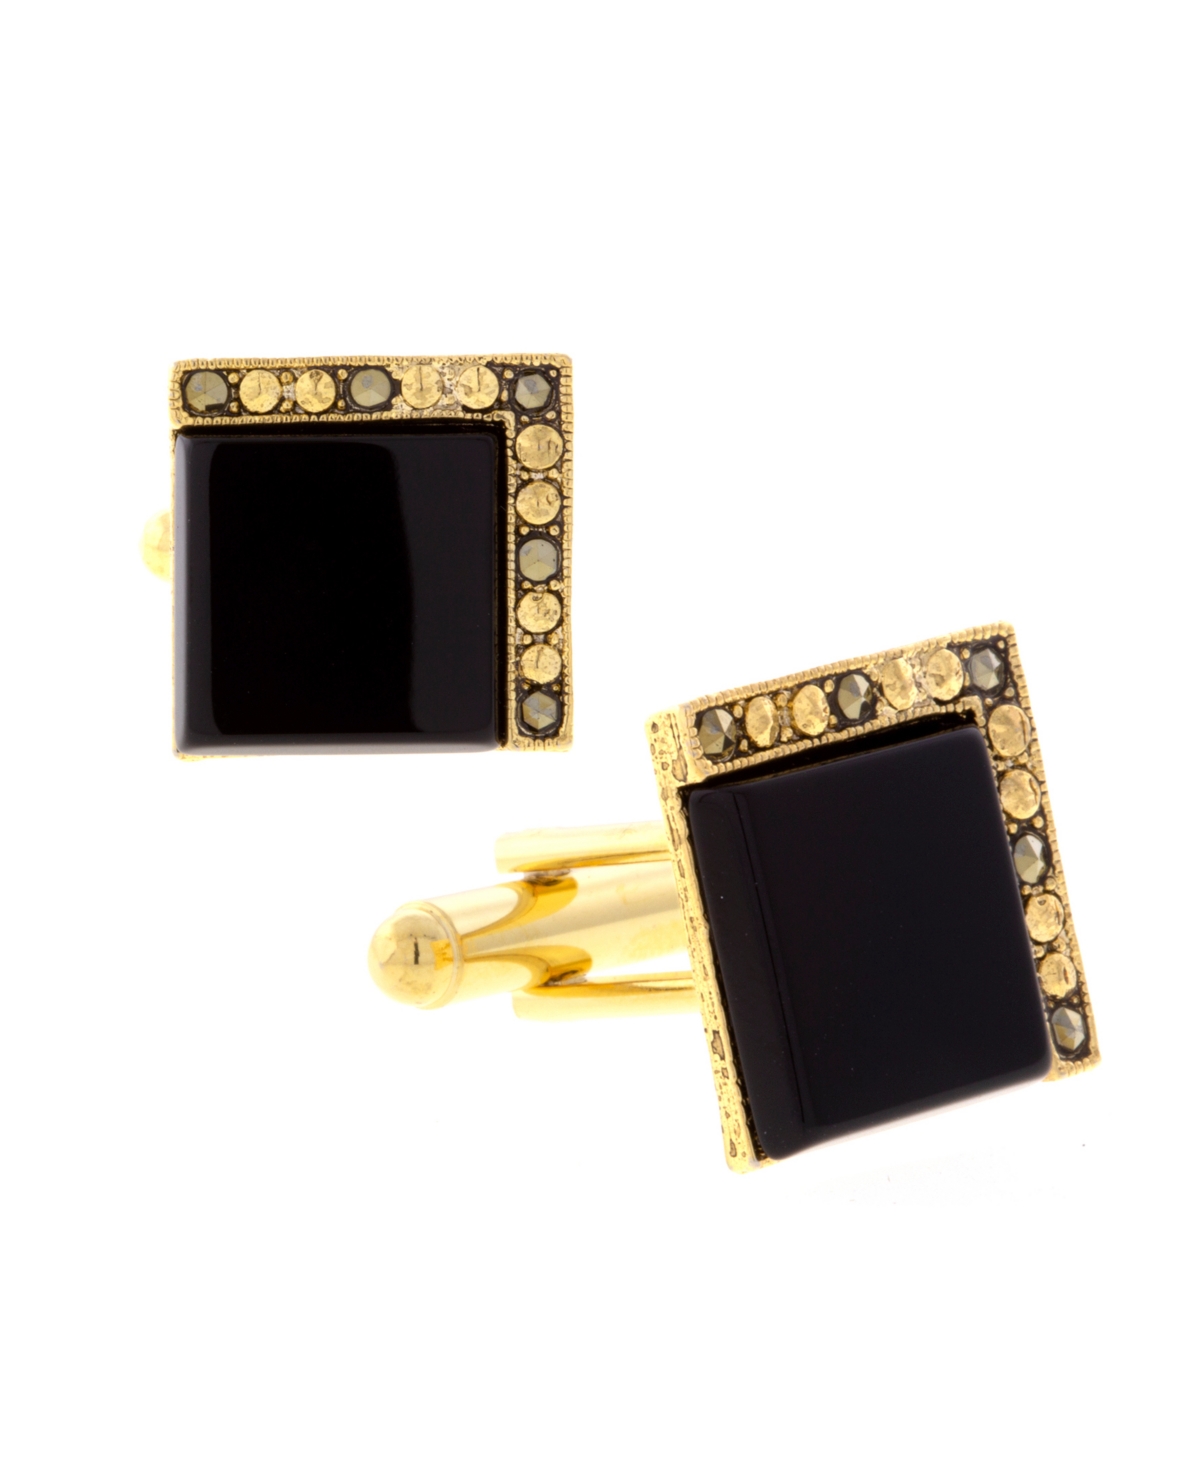 1928 Jewelry 14k Gold Plated Onyx Square Cufflinks In Black